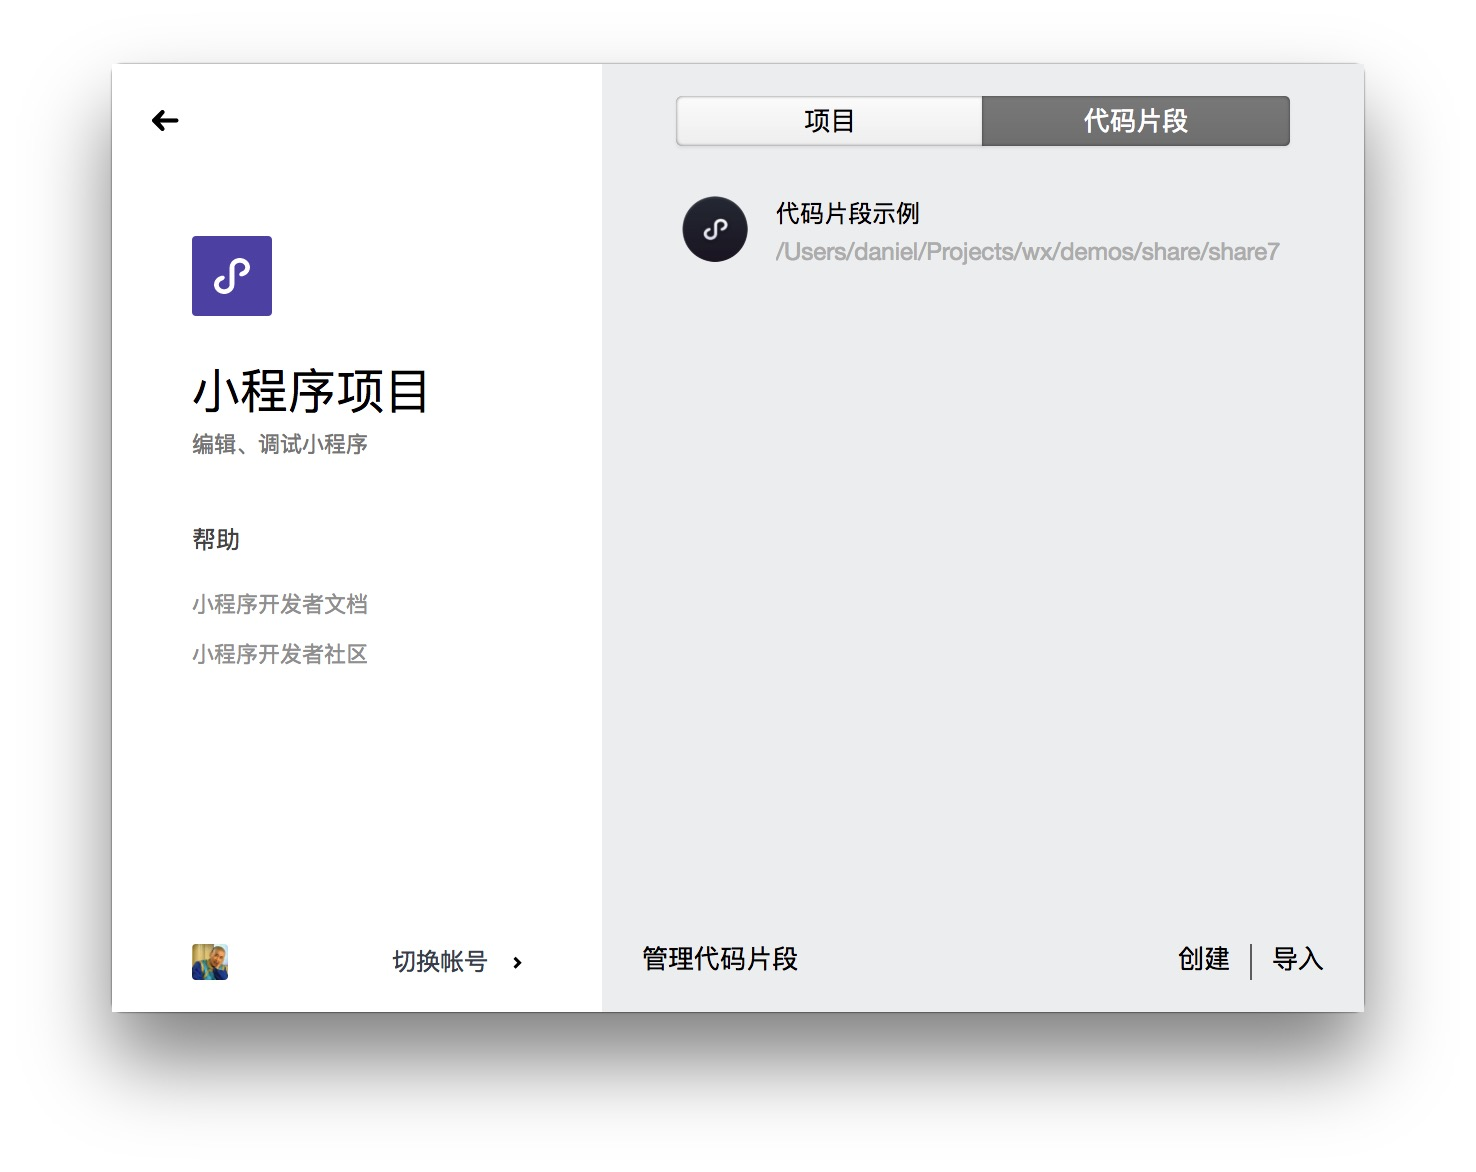 WeChat Gadget Tool Snippets